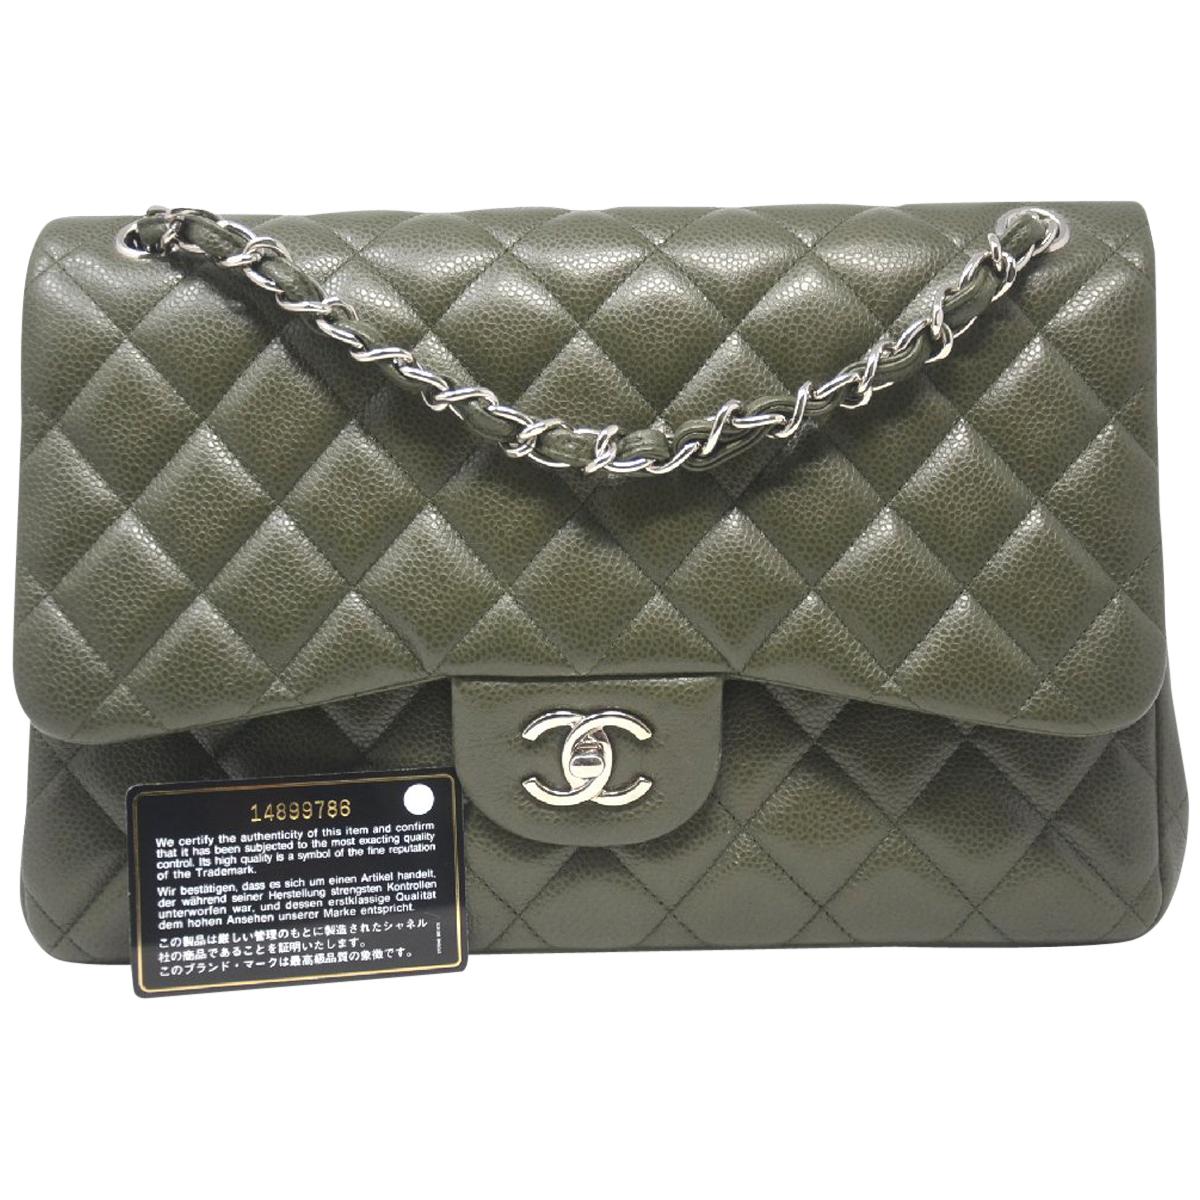 Chanel, Olive Green Calfskin Classic Double Flap